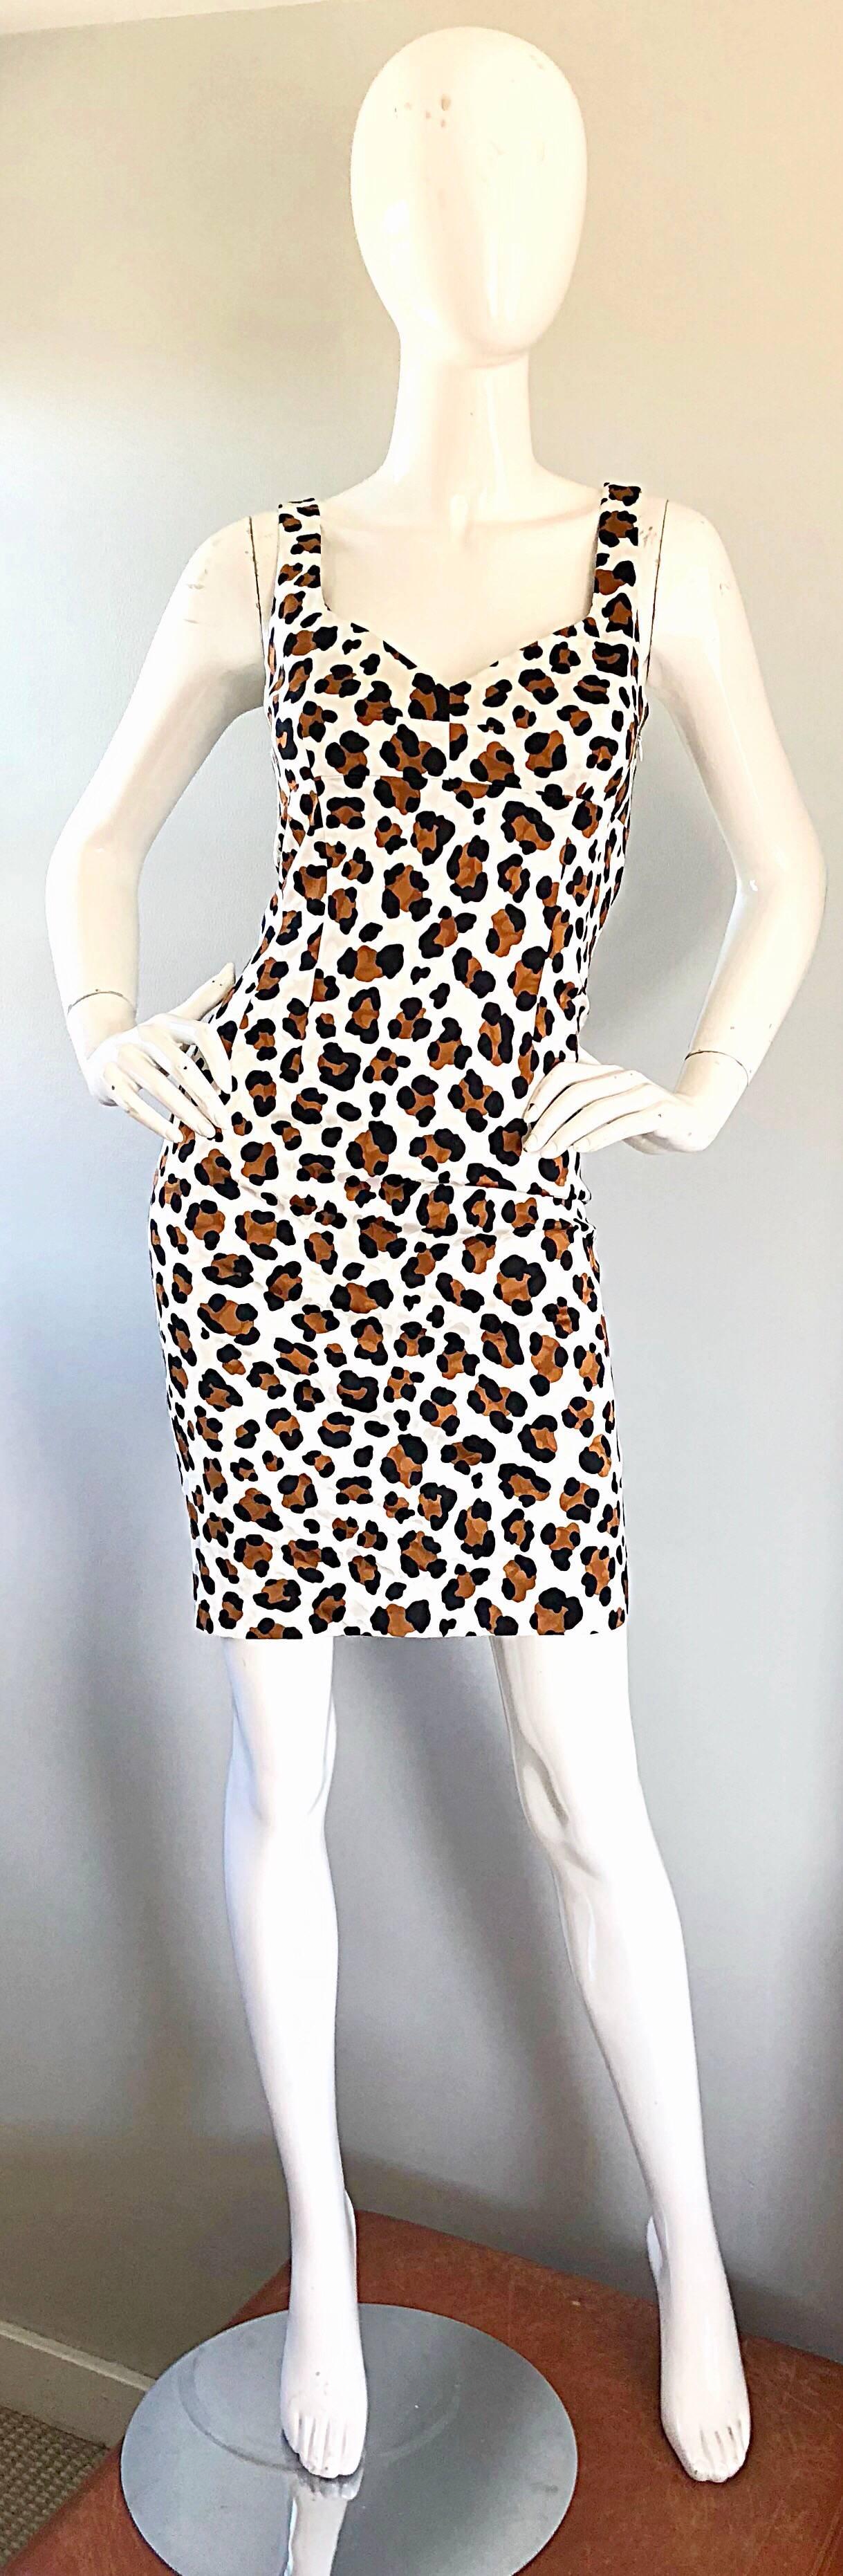 Michael Kors Collection Size 8 White Cheetah Leopard Print Early 2000s Dress 2